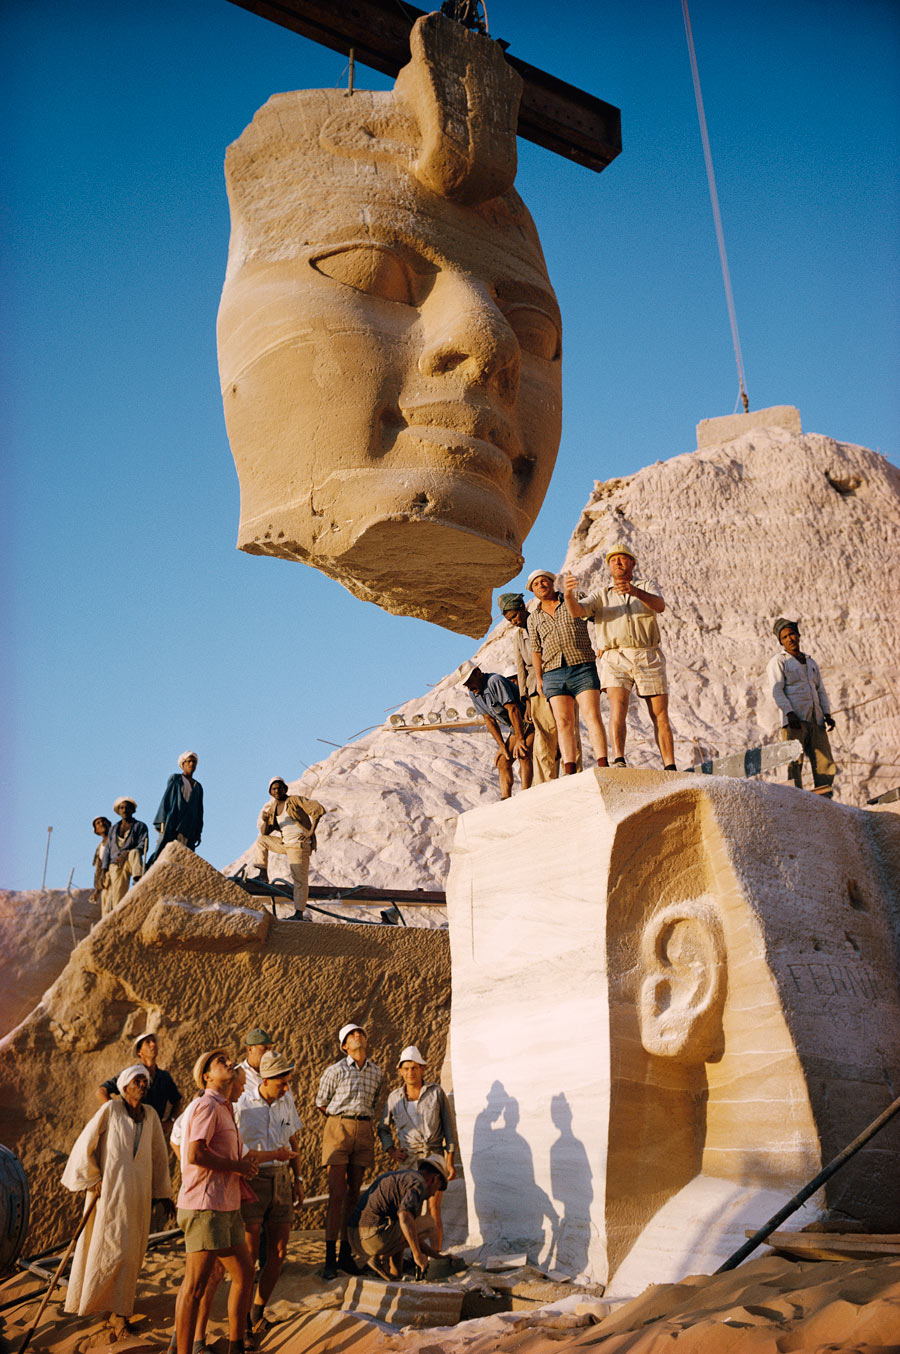 Cranes lift the face of a statue from the Abu Simbel Temples in Egypt, May 1966. Photograph by Georg Gerster, National Geographic